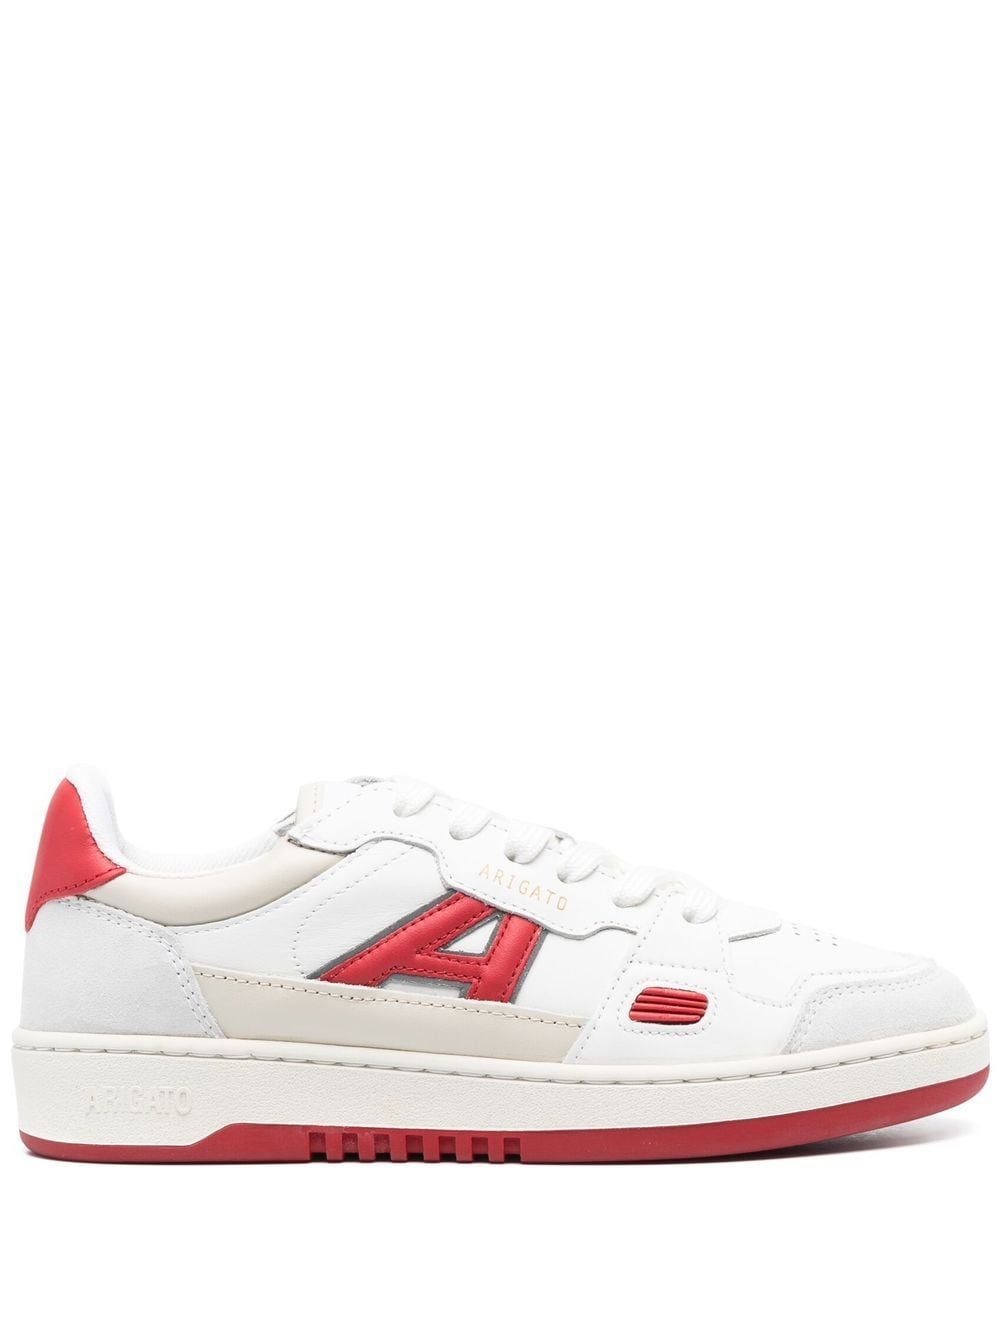 Axel Arigato A-Dice Lo leather sneakers - White